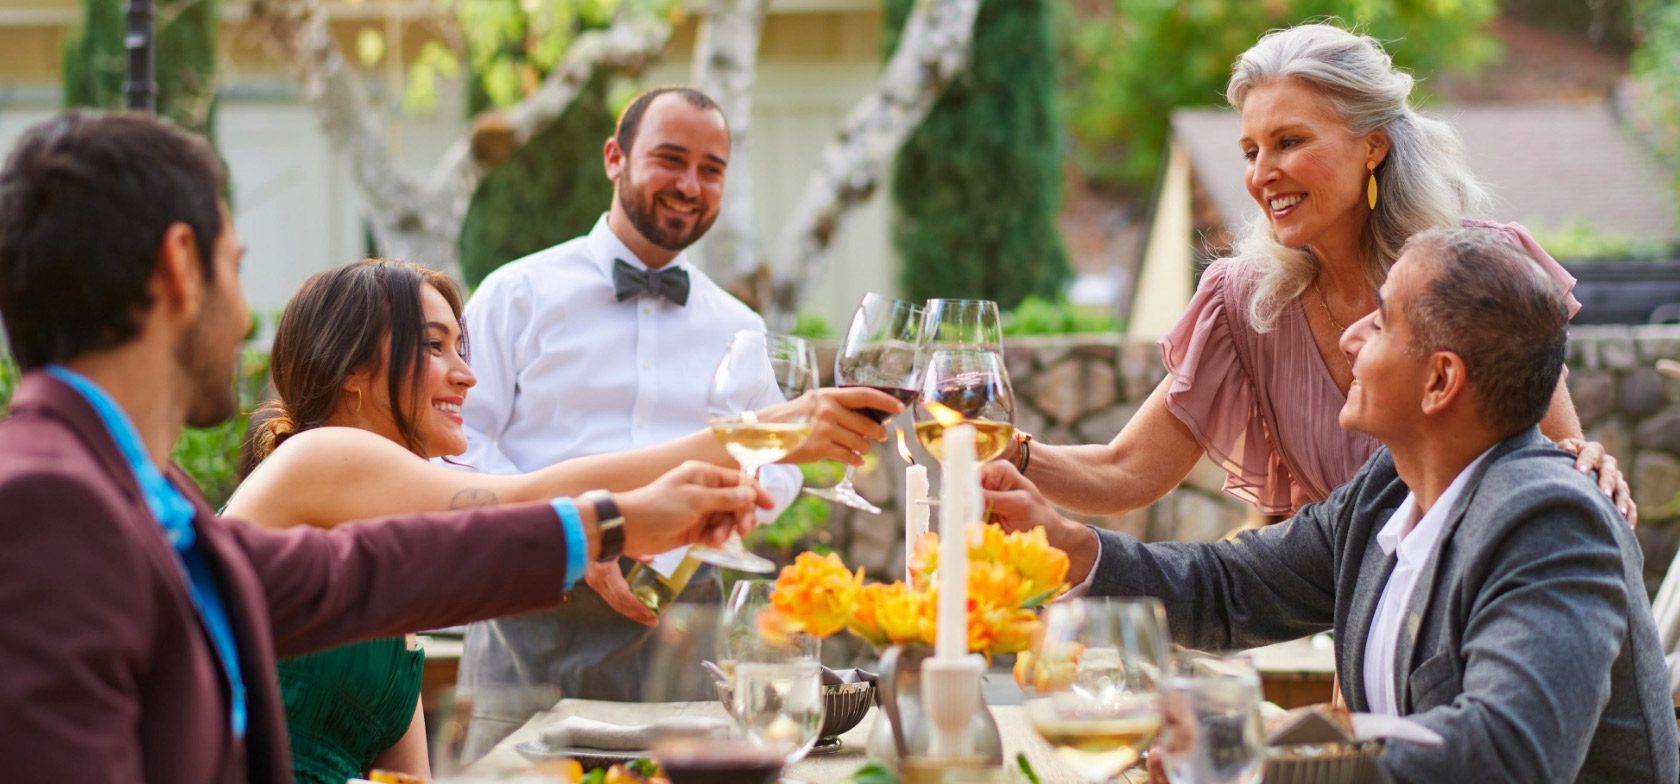 group of people toasting with wine around an outdoor dining table